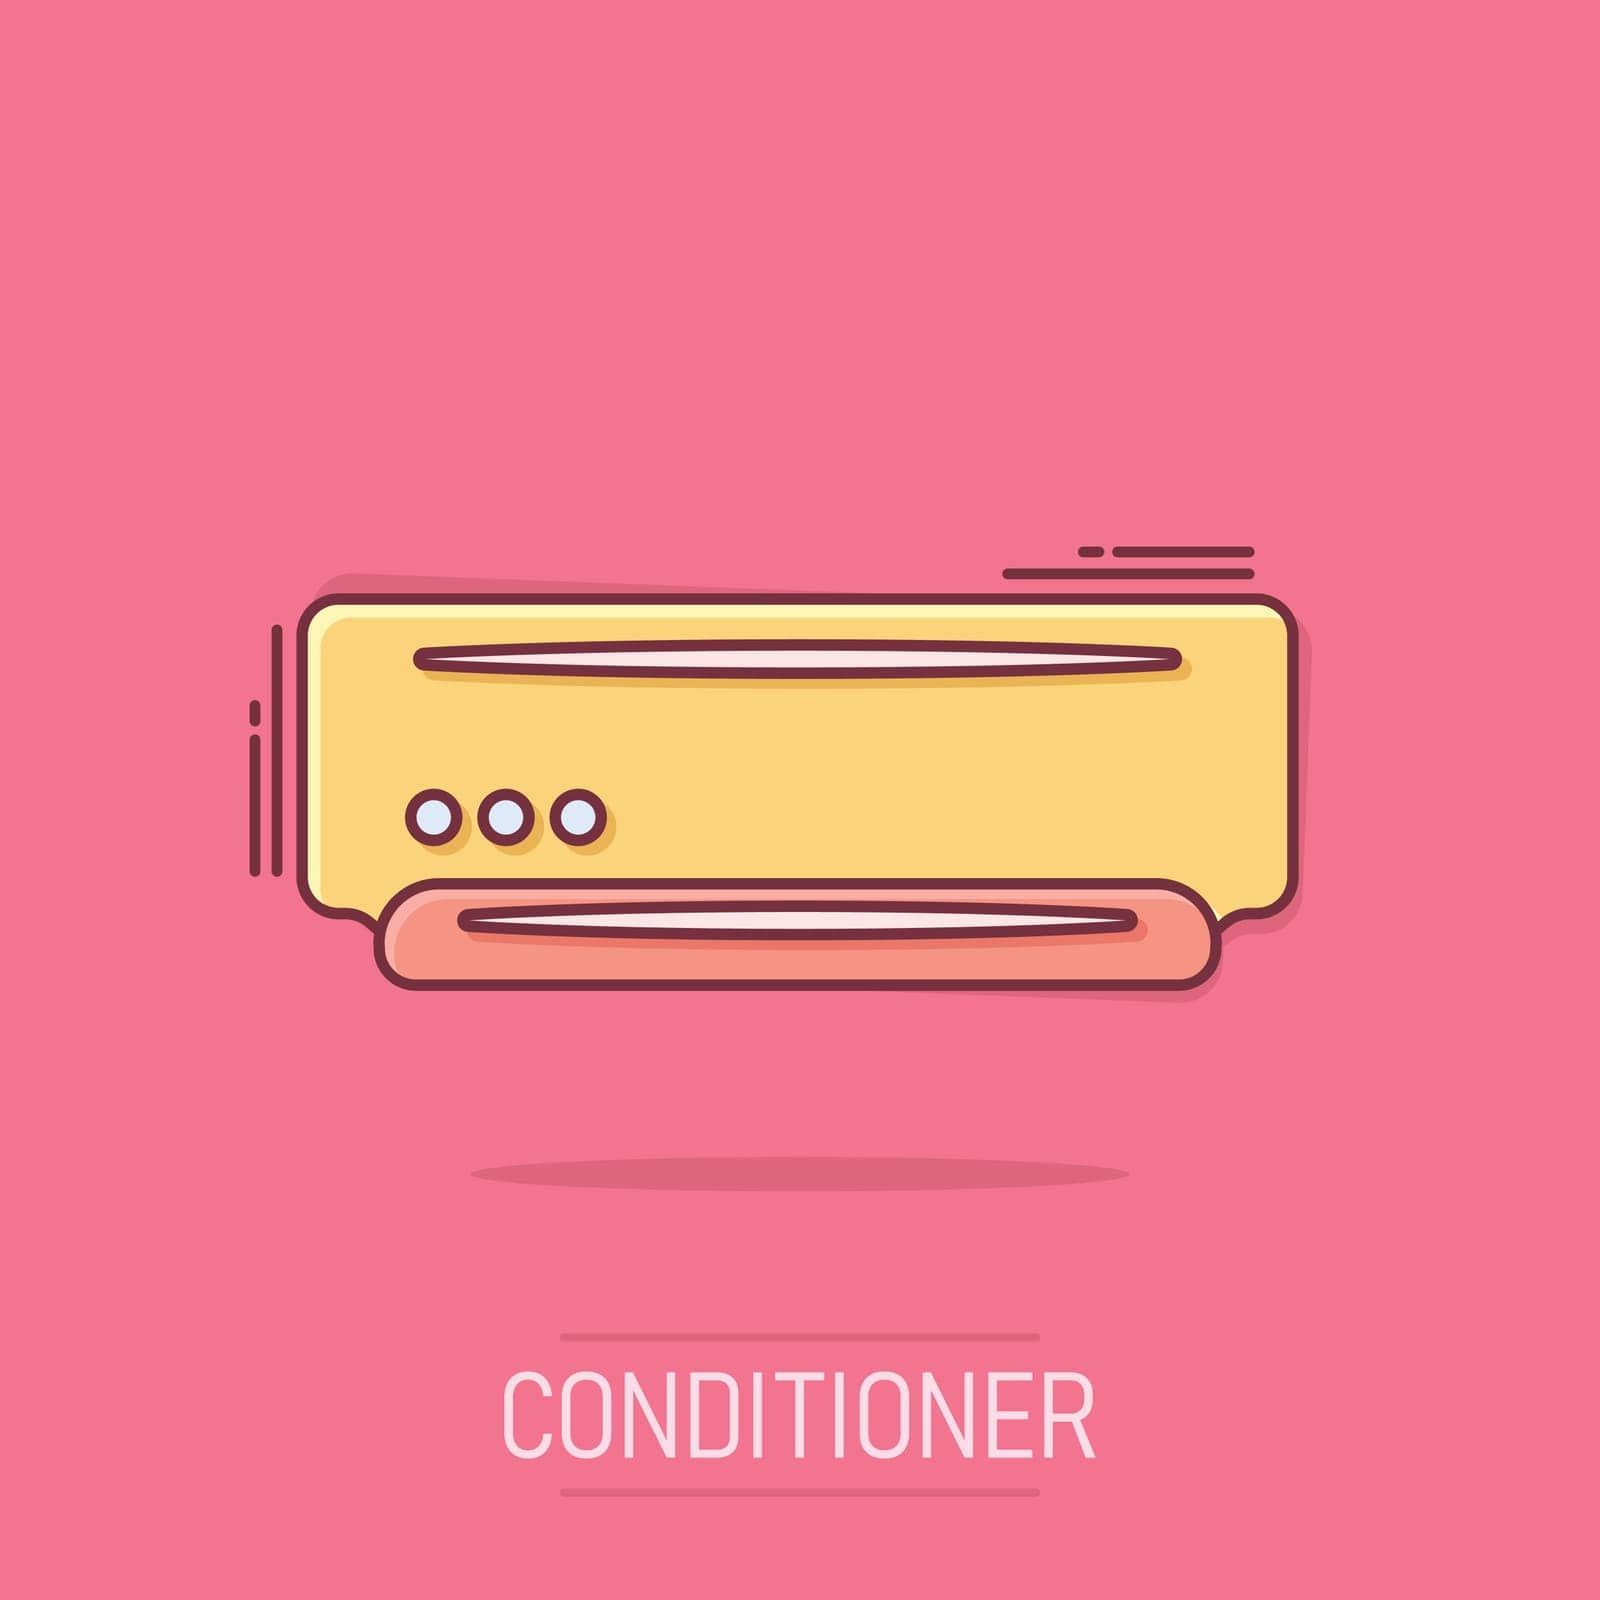 Conditioner icon in comic style. Cooler cartoon vector illustration on isolated background. Cold climate splash effect business concept.